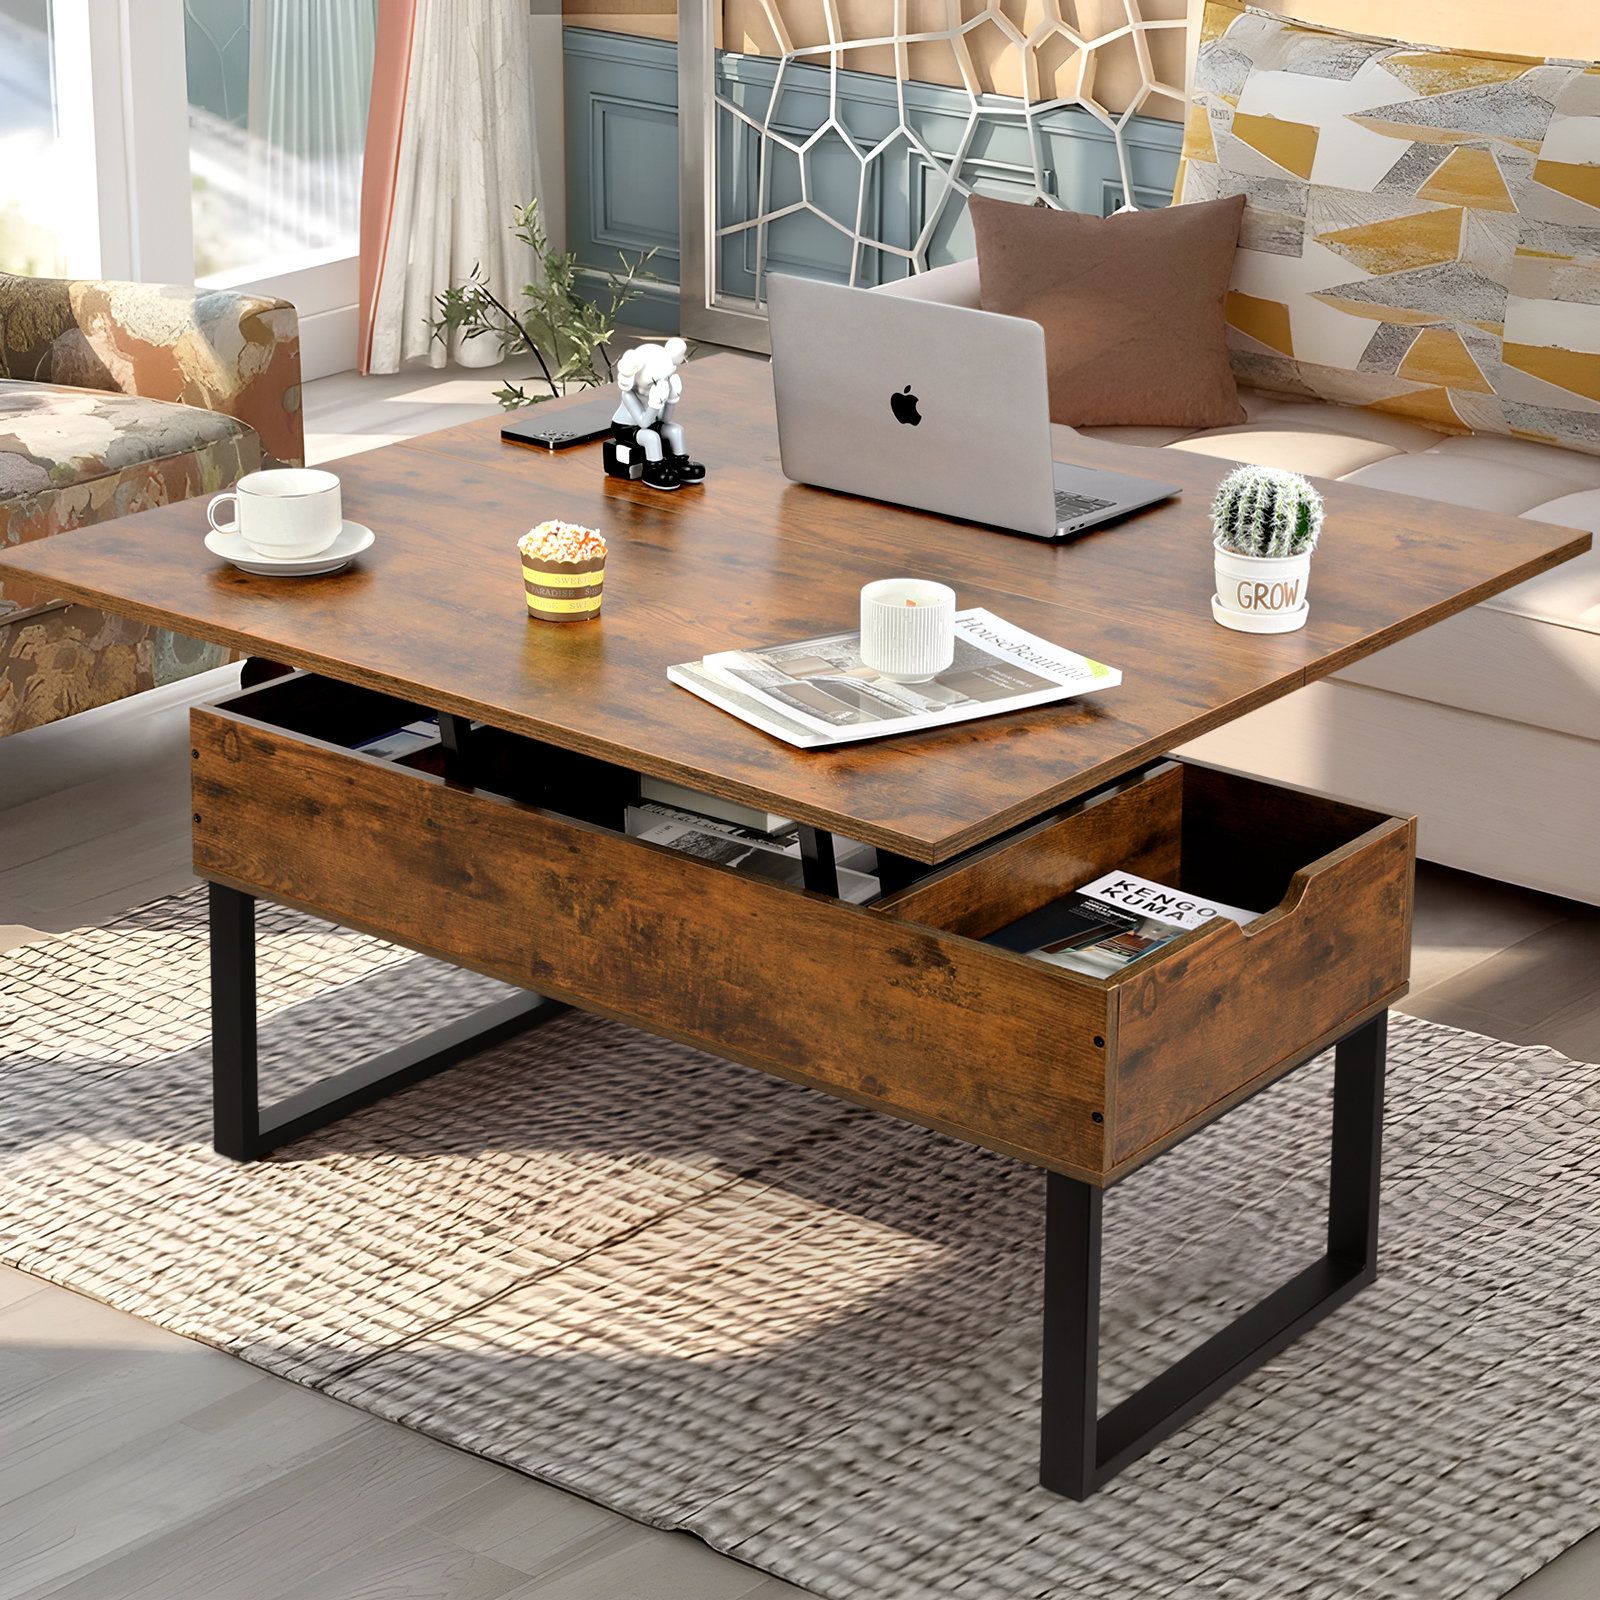 17 Stories Allyssia Lift Top Coffee Table & Reviews | Wayfair With Regard To Wood Lift Top Coffee Tables (View 3 of 15)